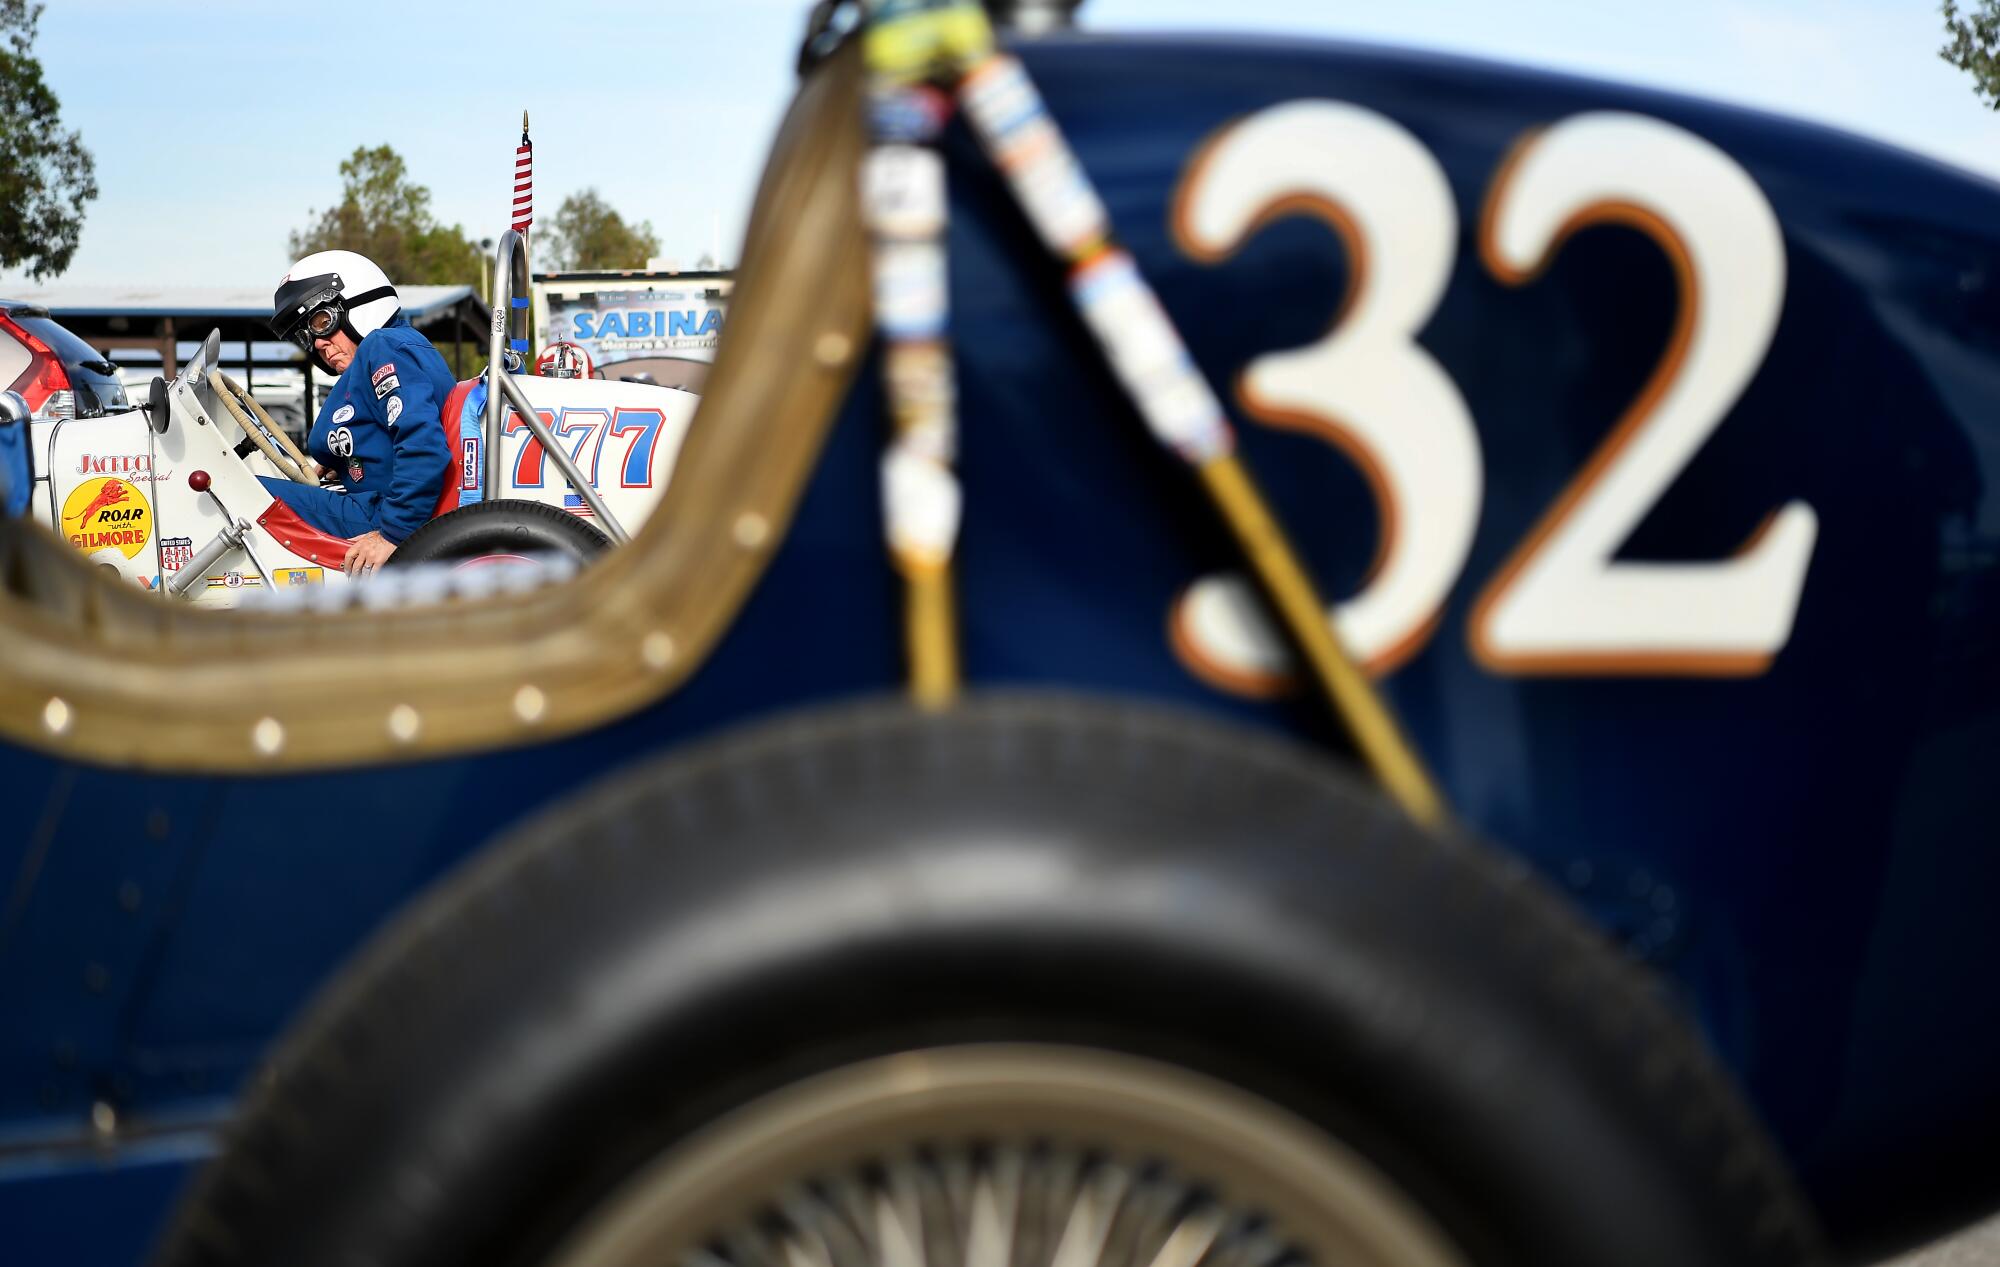 Dennis Howland climbs into his race car before a practice run at Buttonwillow Raceway in Buttonwillow, Calif., on Saturday.